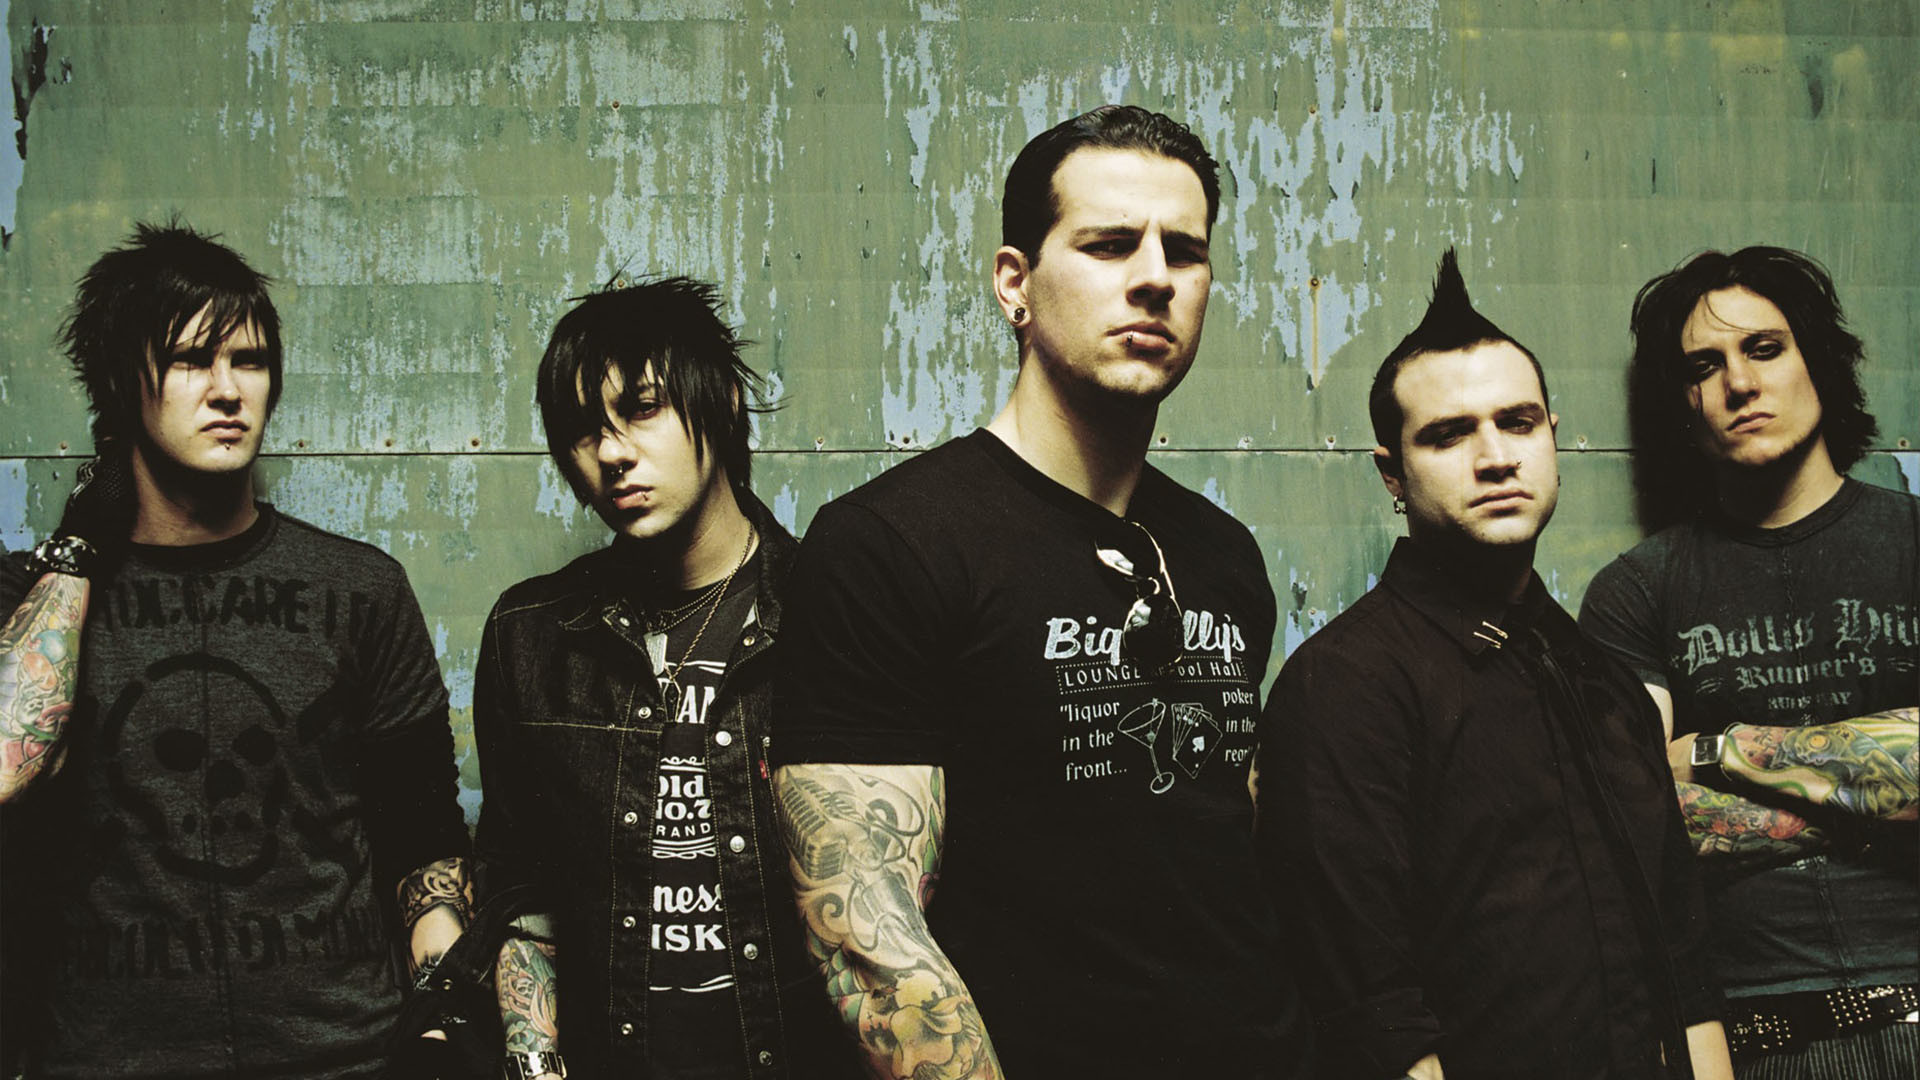 1920x1080 Avenged Sevenfold free download